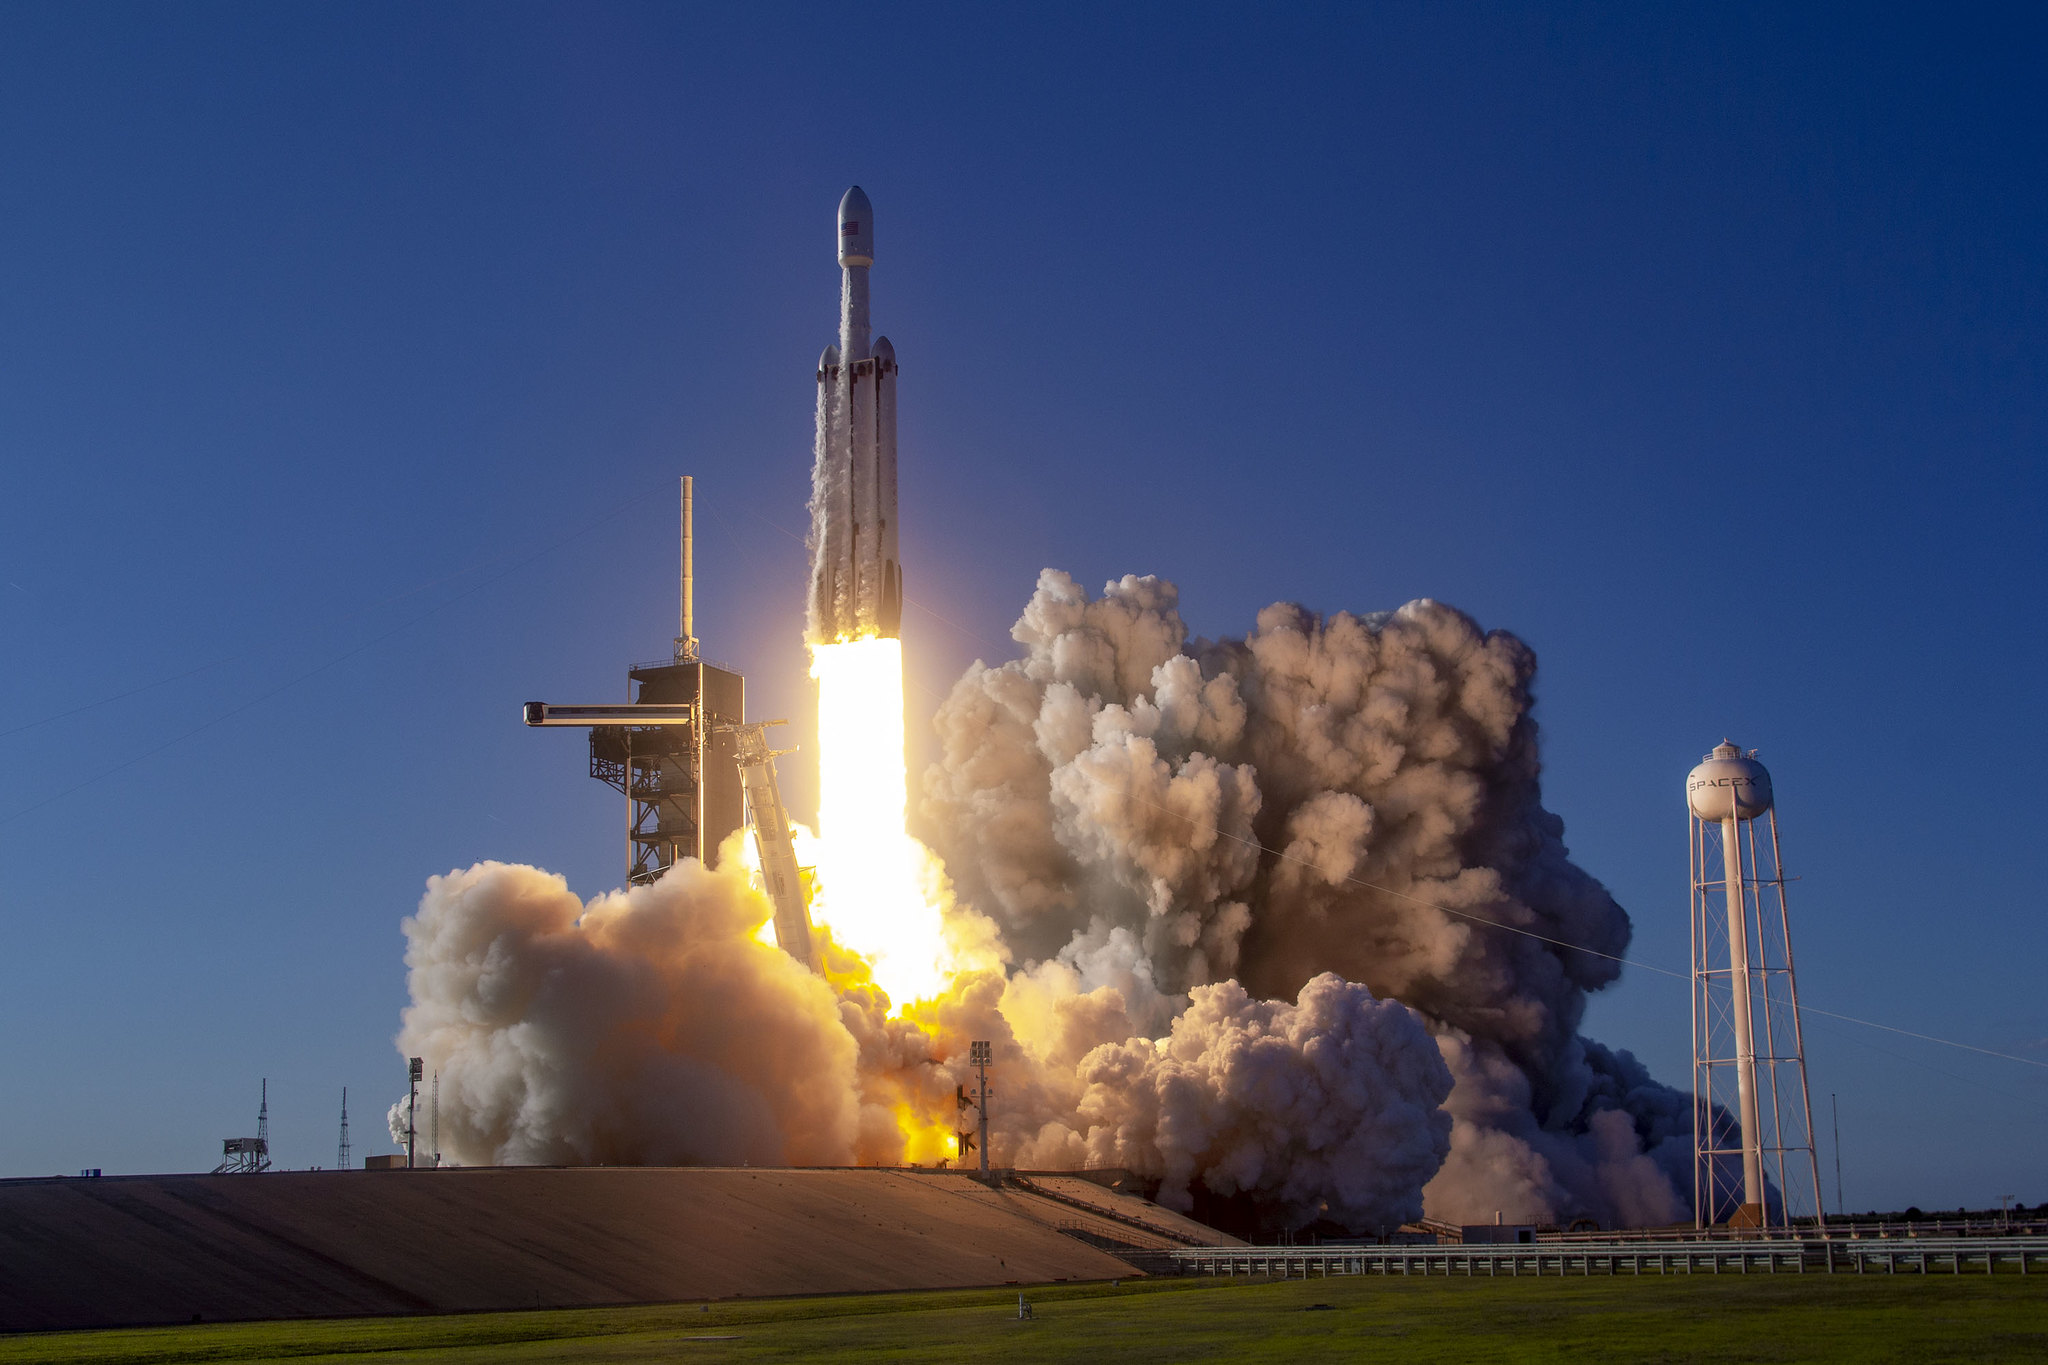 SpaceX Falcon Heavy rocket launched the Arabsat-6A satellite